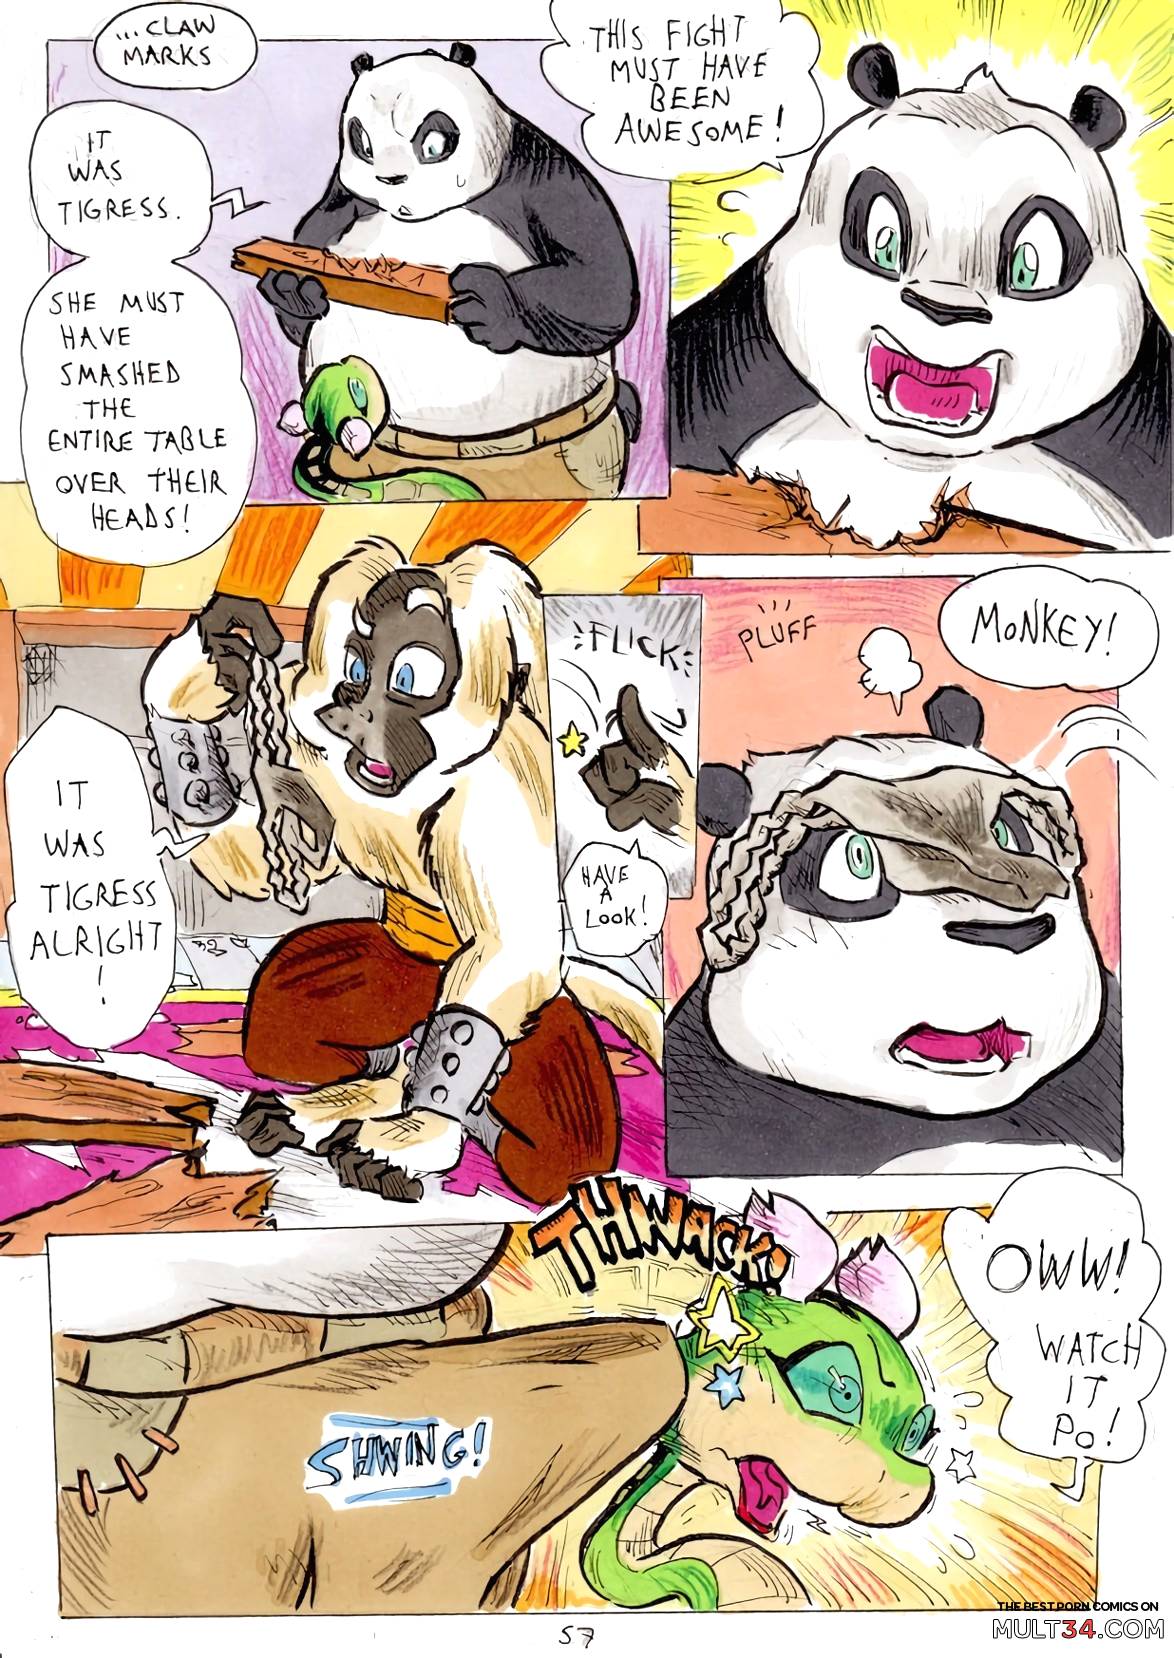 Better Late than Never 1 page 59